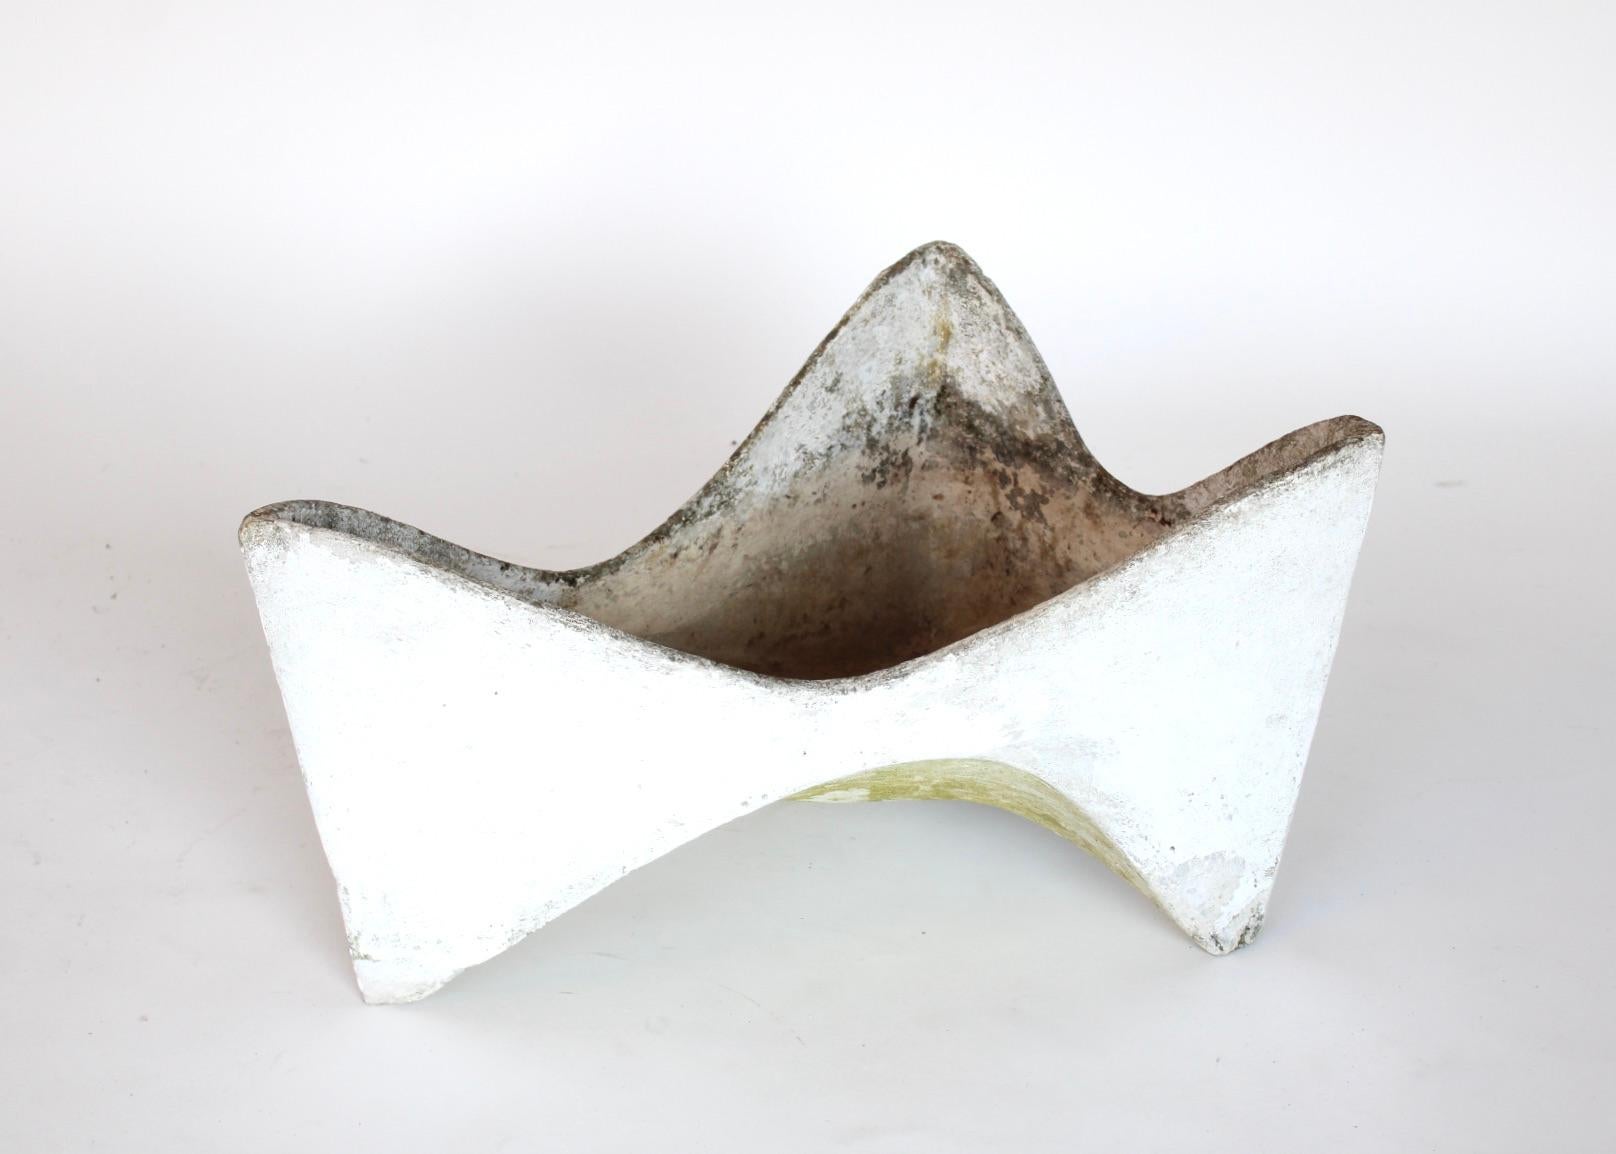 Willy Guhl molar or tooth planter, designed for Eternit. Arched form resembles and often called a tooth planter. One of the most purely sculptural planters he designed and produced. Sculpted from fibrous cement, in great condition with wonderful